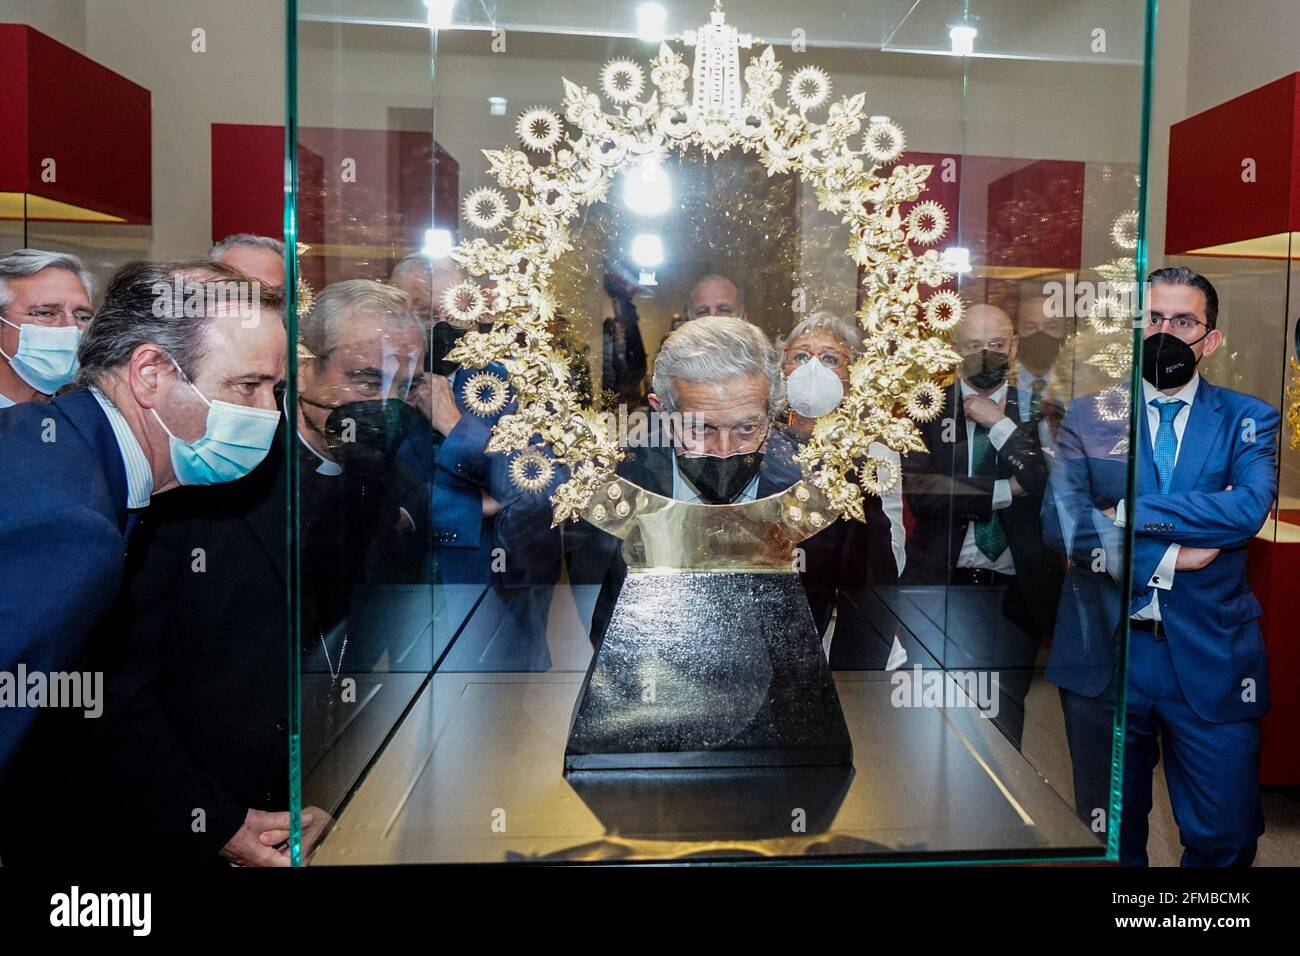 (L to R) President of Agrupacion de Cofradias de Semana Santa de Malaga, Pablo Atencia; Malaga Bishop, Jesus Catala Ibañez; and President of Fundacion Unicaja Braulio Medel observe an exposed crown property of Congregacion de Mena during the exhibition at Centro Cultural Fundacion Unicaja.'Un siglo de esplendor' is an exhibition that shows the artistic heritage of the Holy Week brotherhoods of Malaga and is one of the events organized by Agrupacion de Cofradias de Semana Santa de Malaga for the centenary of the institution. (Photo by Francis Gonzalez/SOPA Images/Sipa USA) Stock Photo